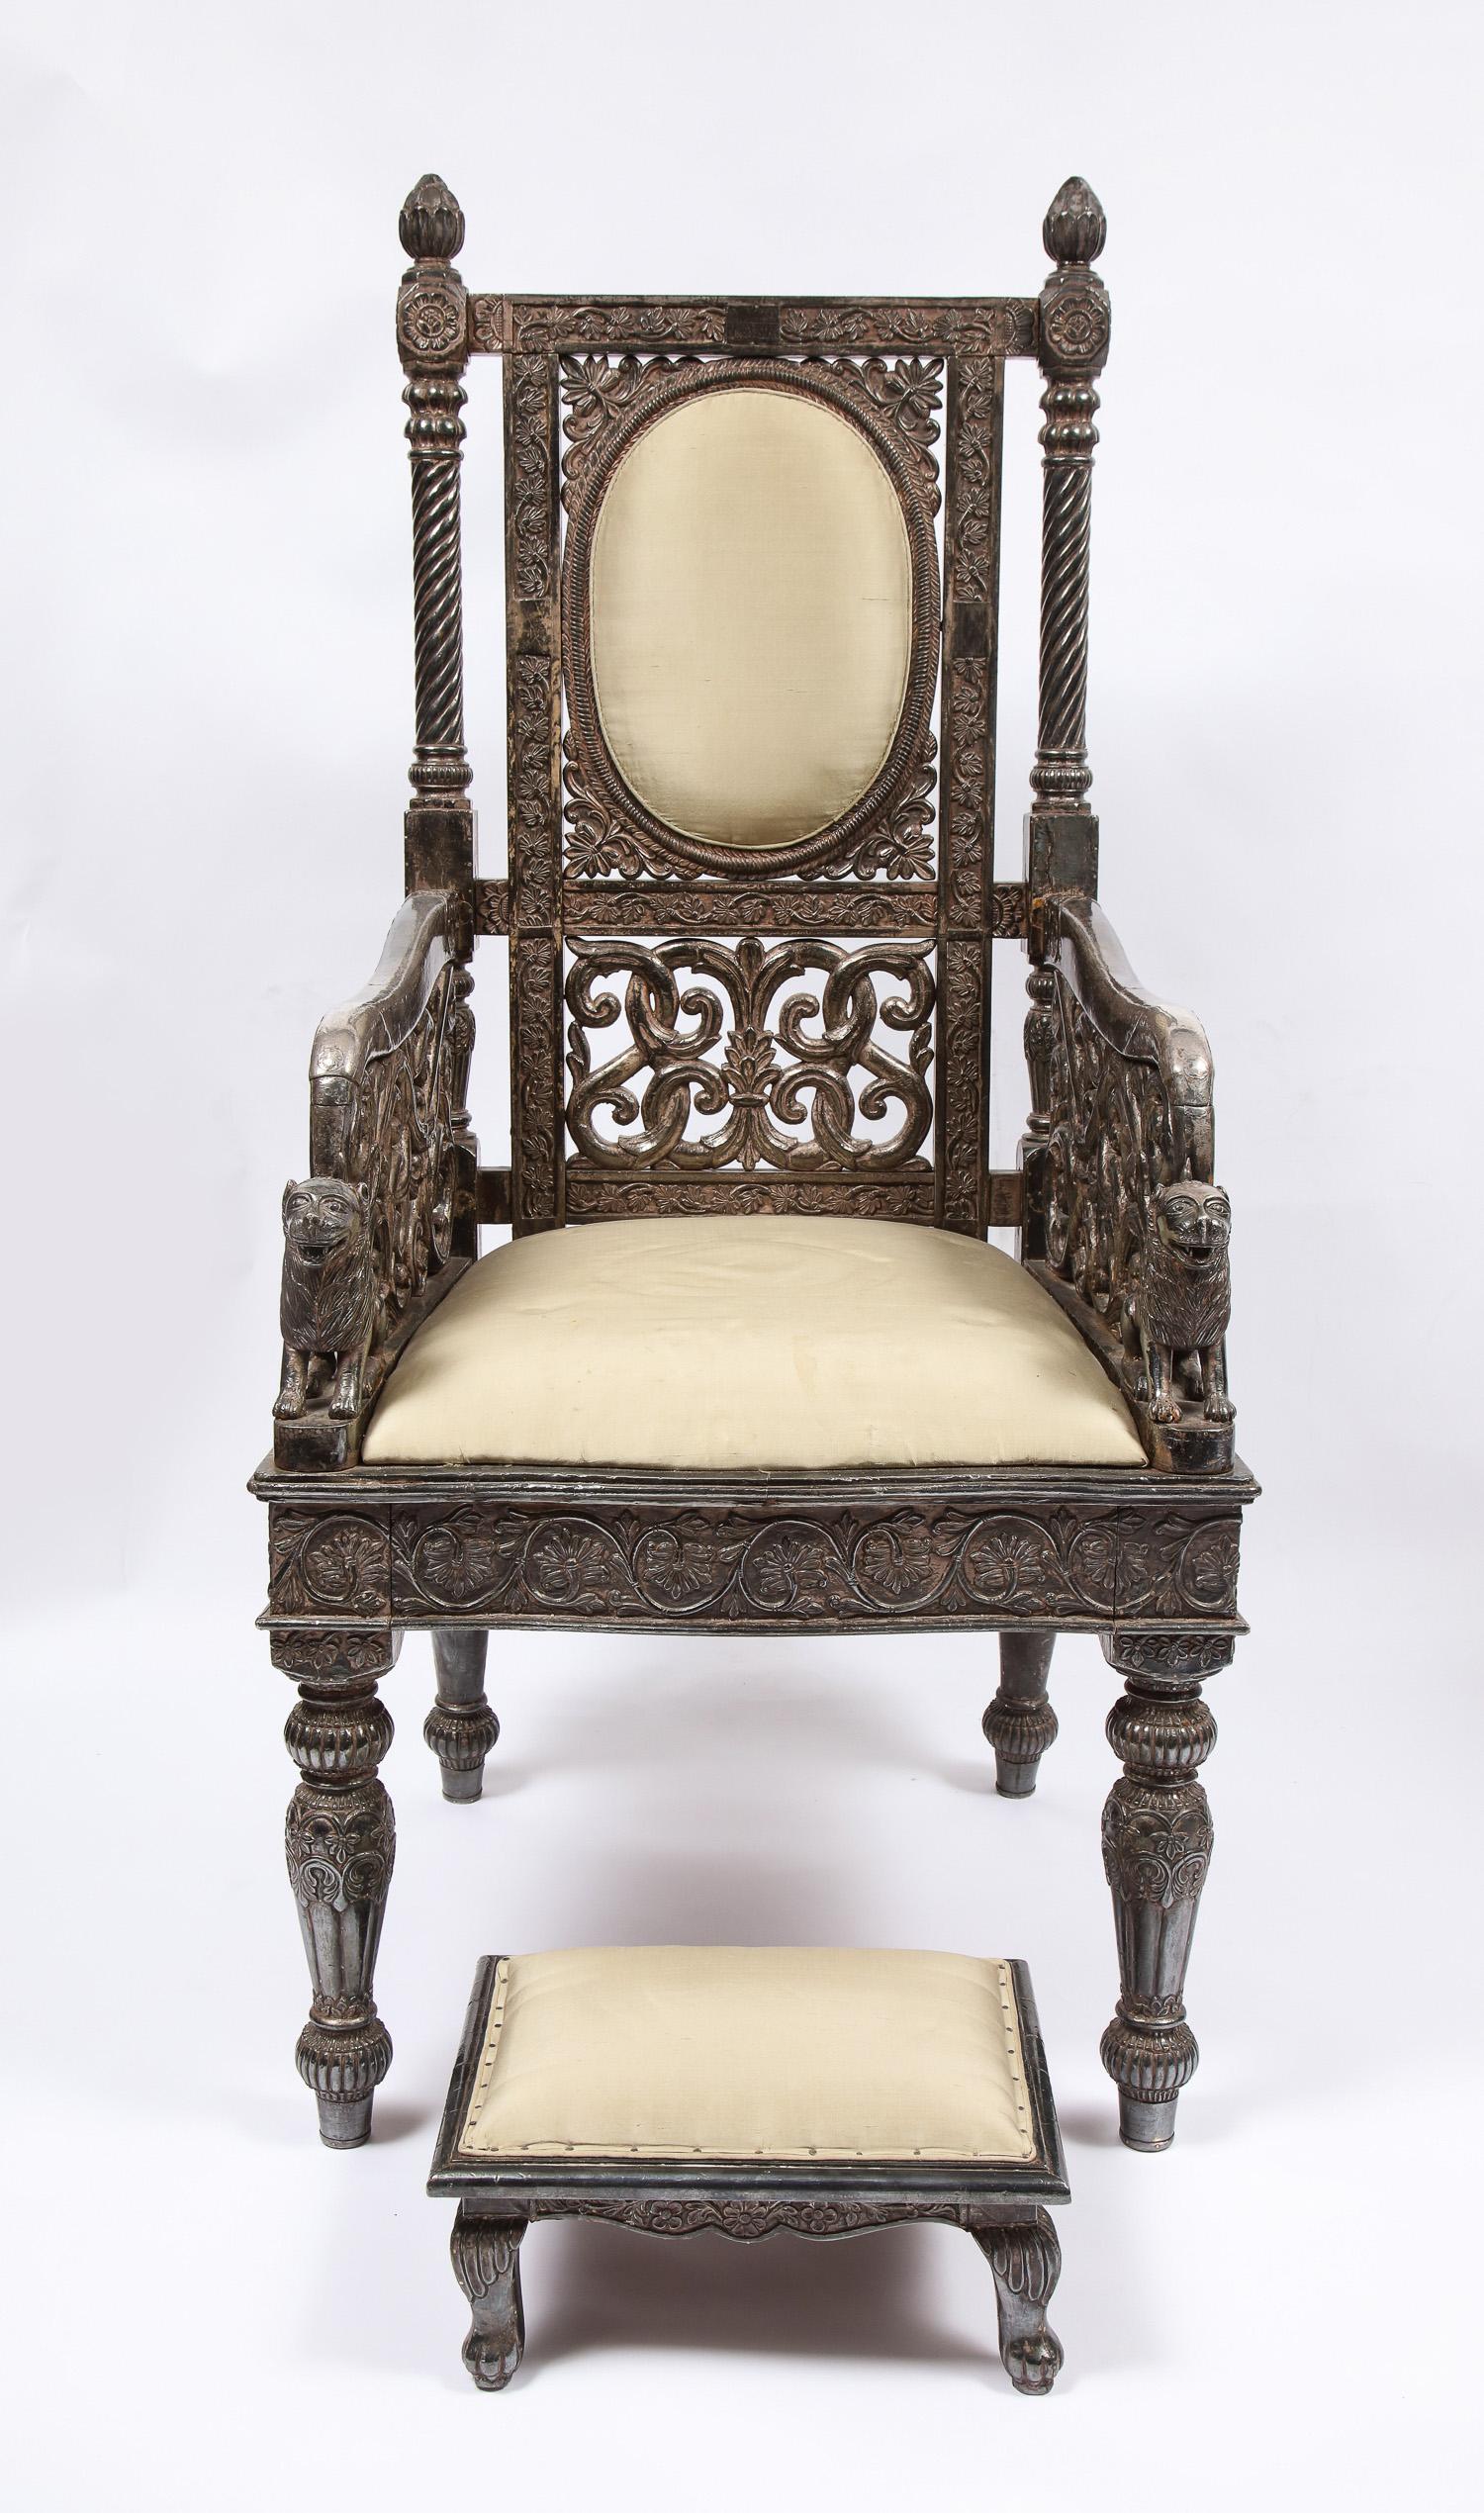 A magnificent and rare Indian Mogul style silver-overlay gilded ceremonial throne chair, made for the Maharajah. These throne chairs played a crucial role in the conception of kingship for all Indian Maharajah's during the eighteenth and nineteenth